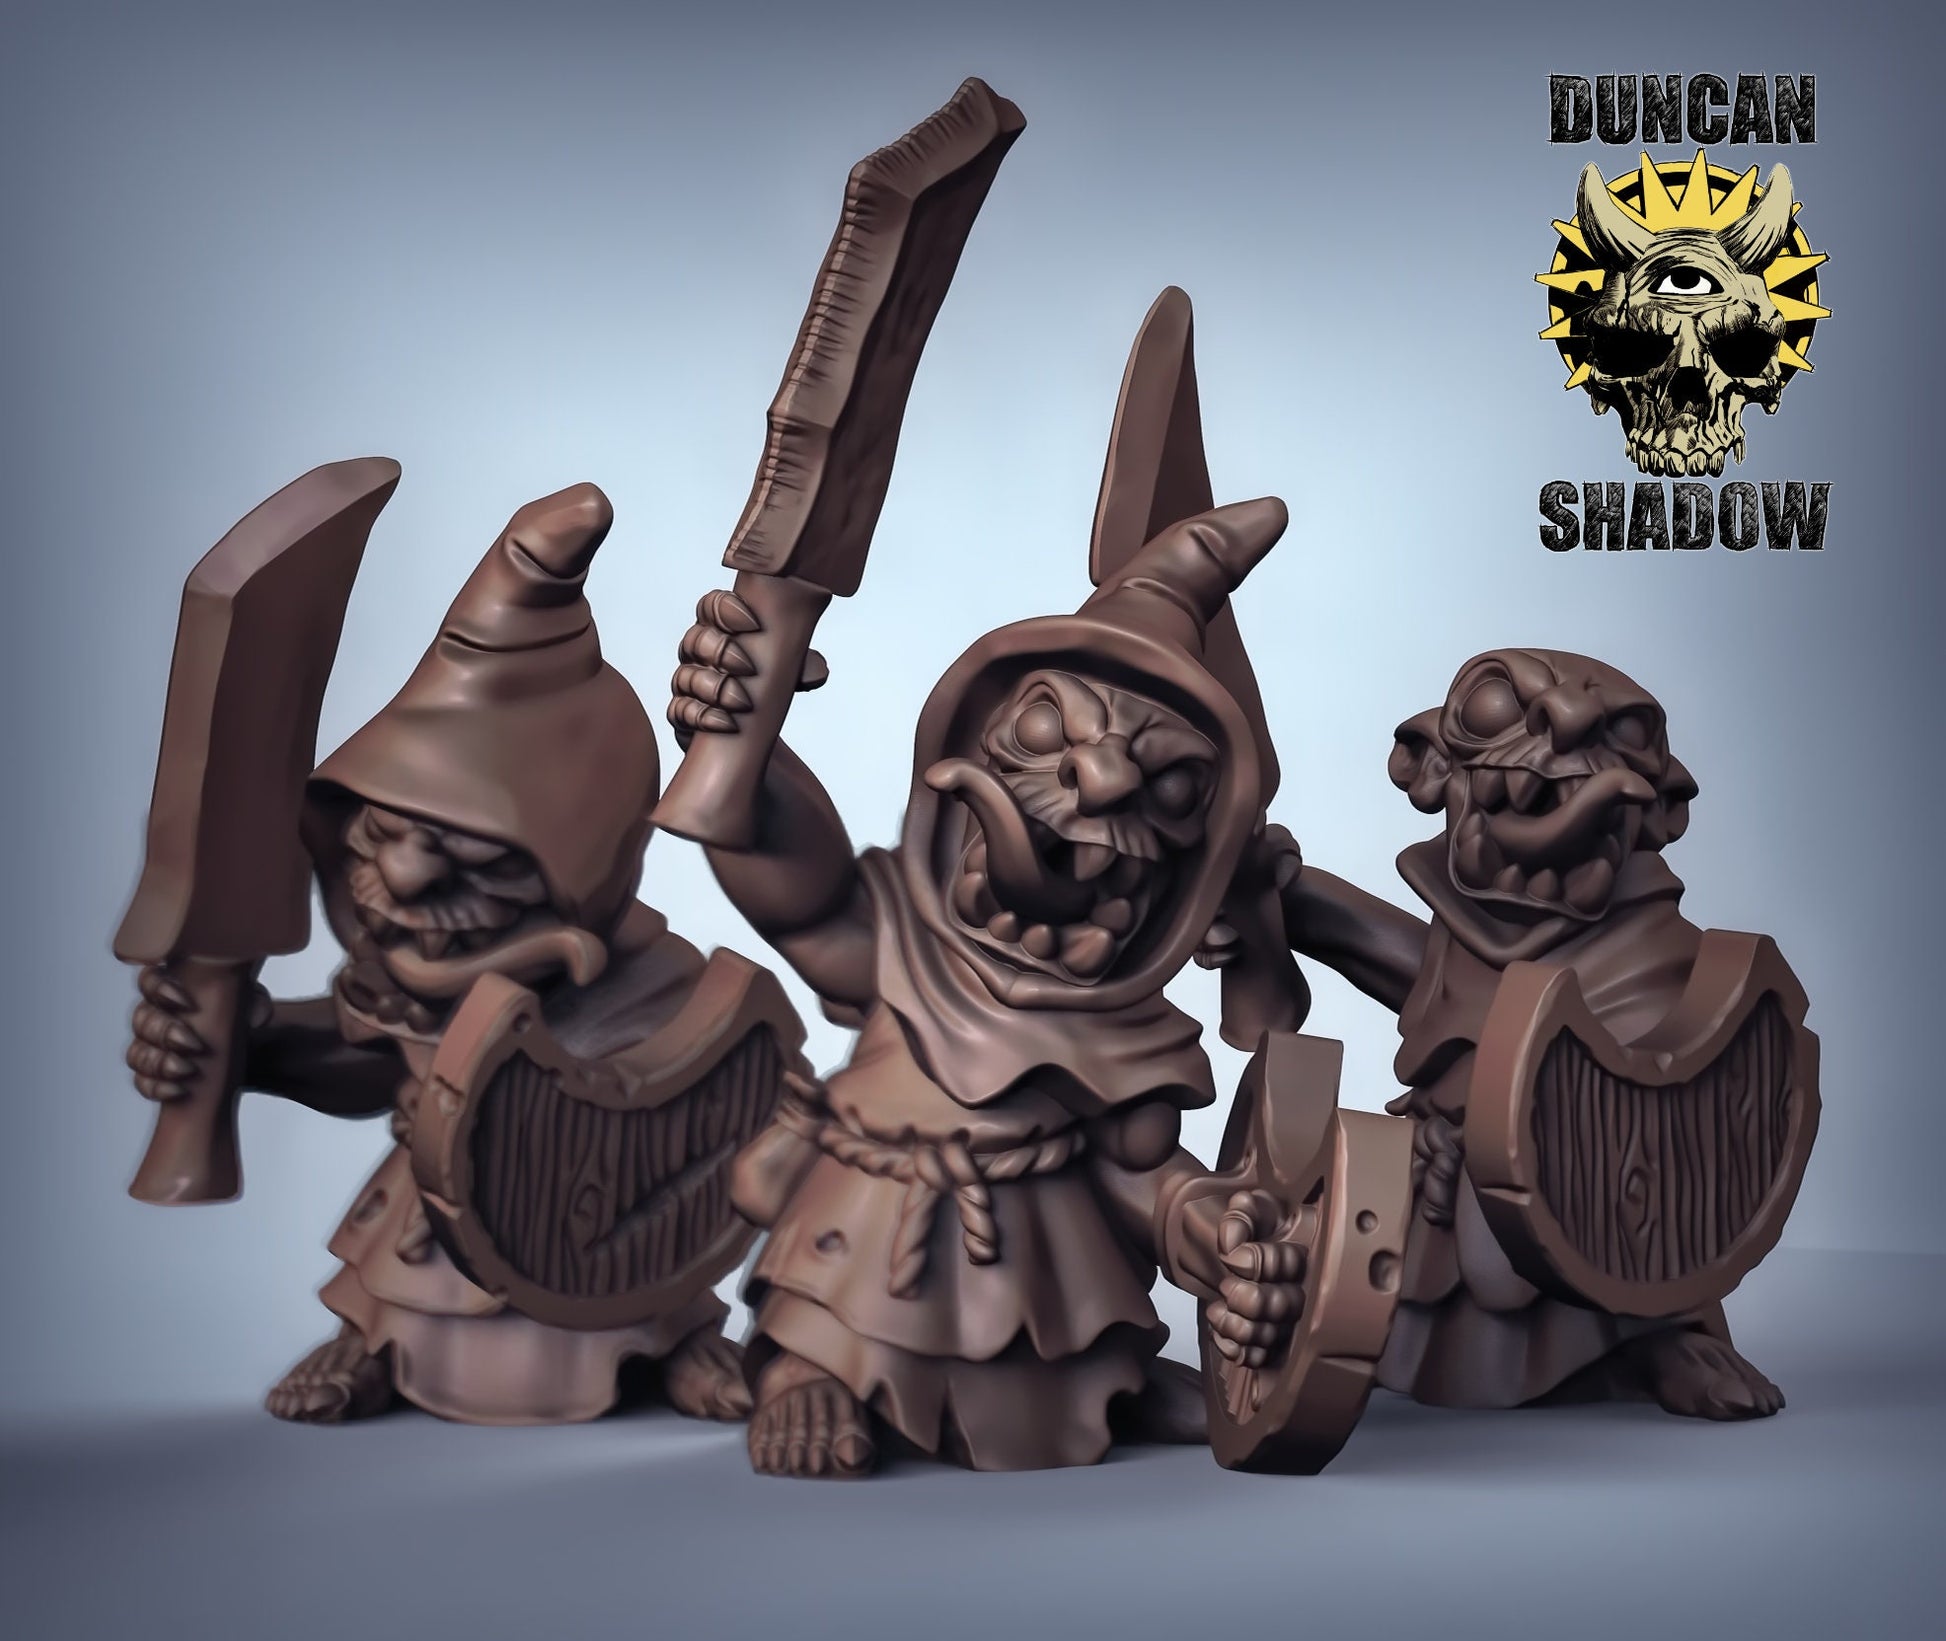 Goblins with Swords - 3 Duncan Shadow Printed Miniatures | Dungeons & Dragons | Pathfinder | Tabletop